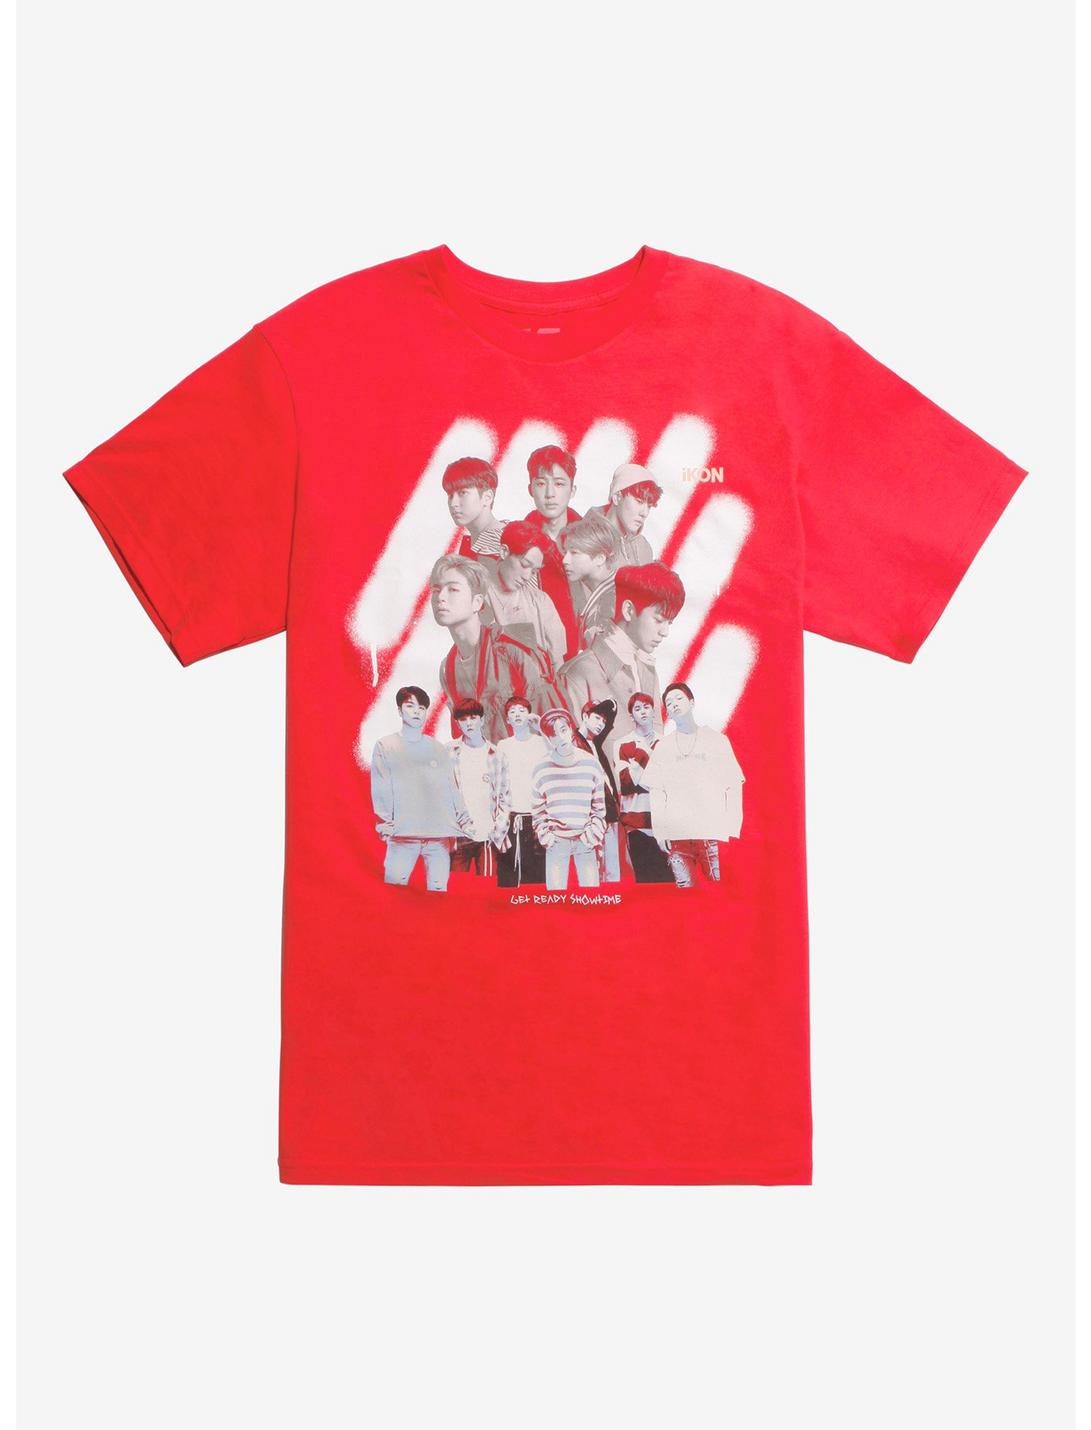 iKon White Paint Get Ready Showtime T-Shirt, RED, hi-res